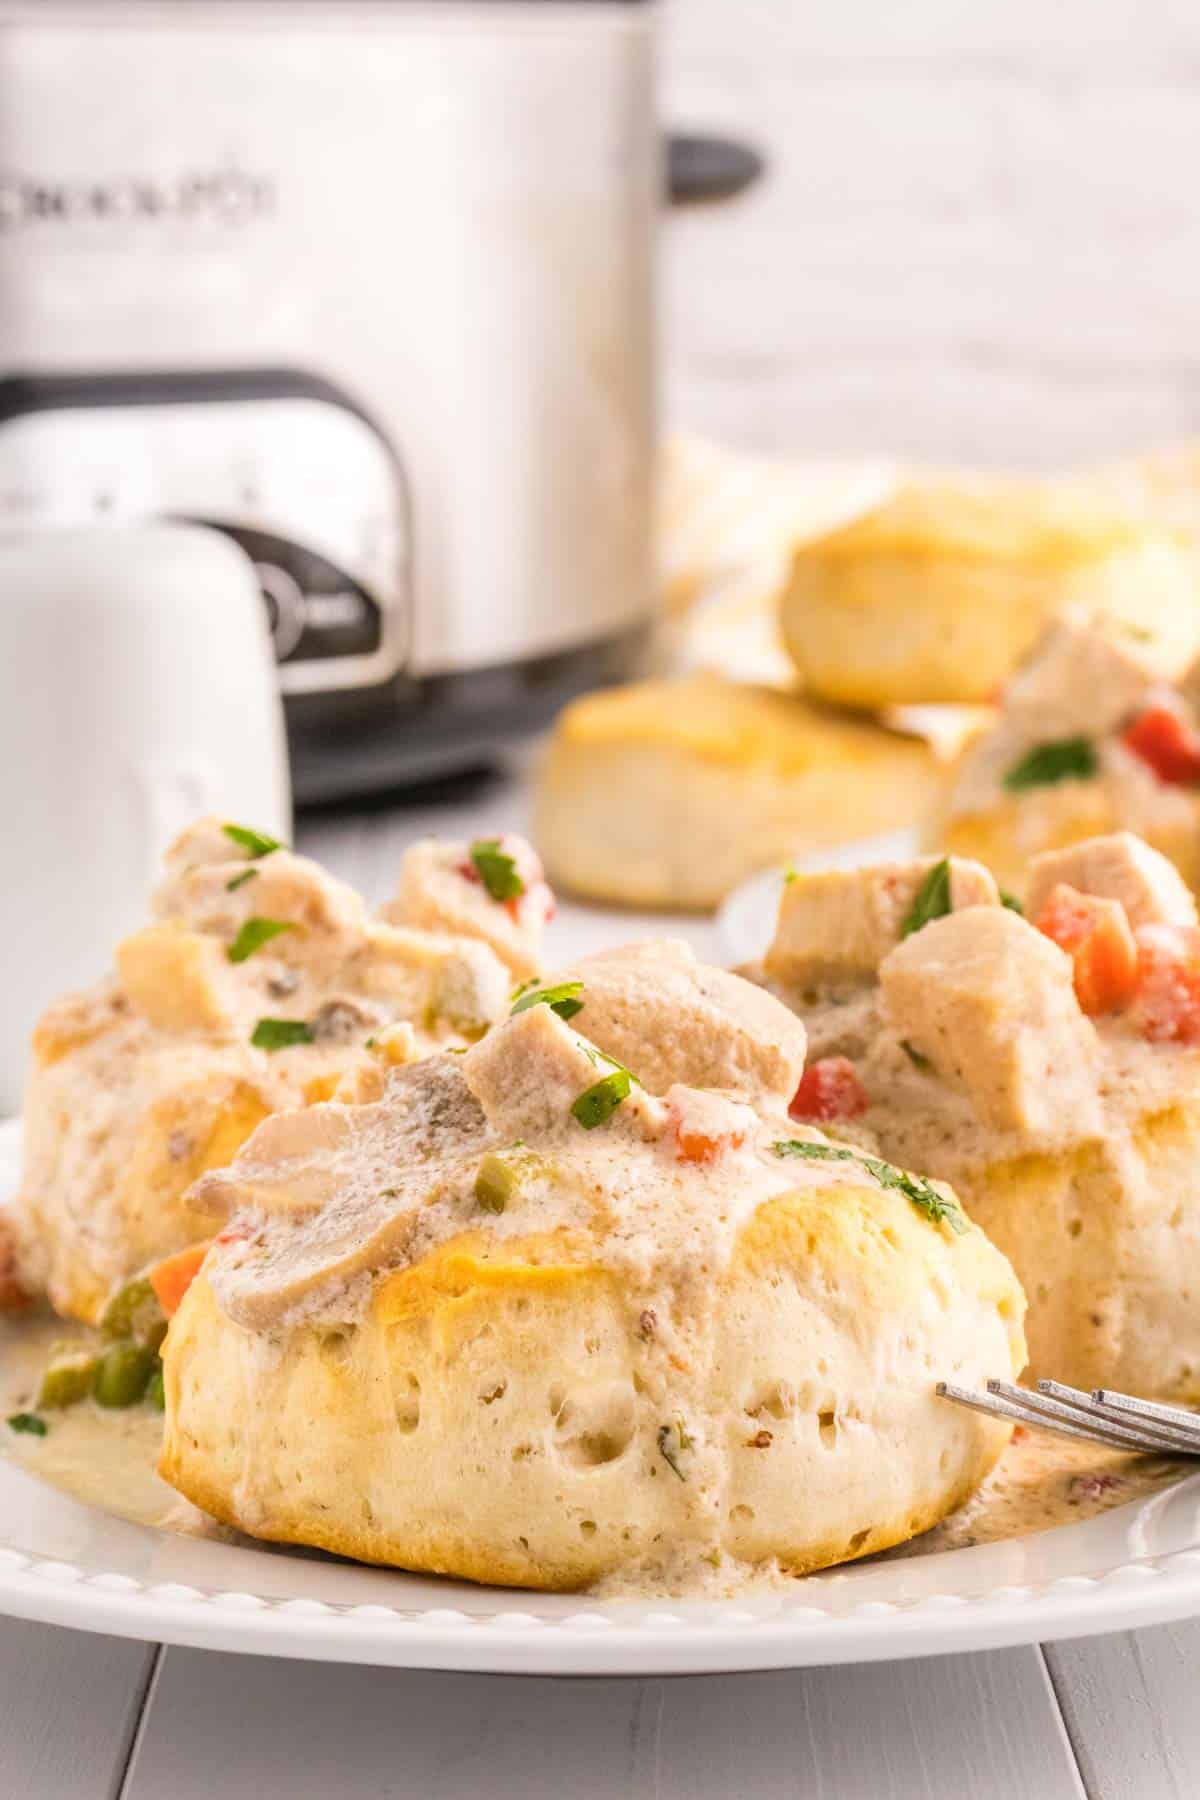 Crock Pot Chicken a la King is an easy slow cooker chicken dinner recipe loaded with chunks of chicken, bell peppers, mushrooms, peas, carrots and pimentos all in a creamy sauce that can be served over biscuits, rice or noodles.